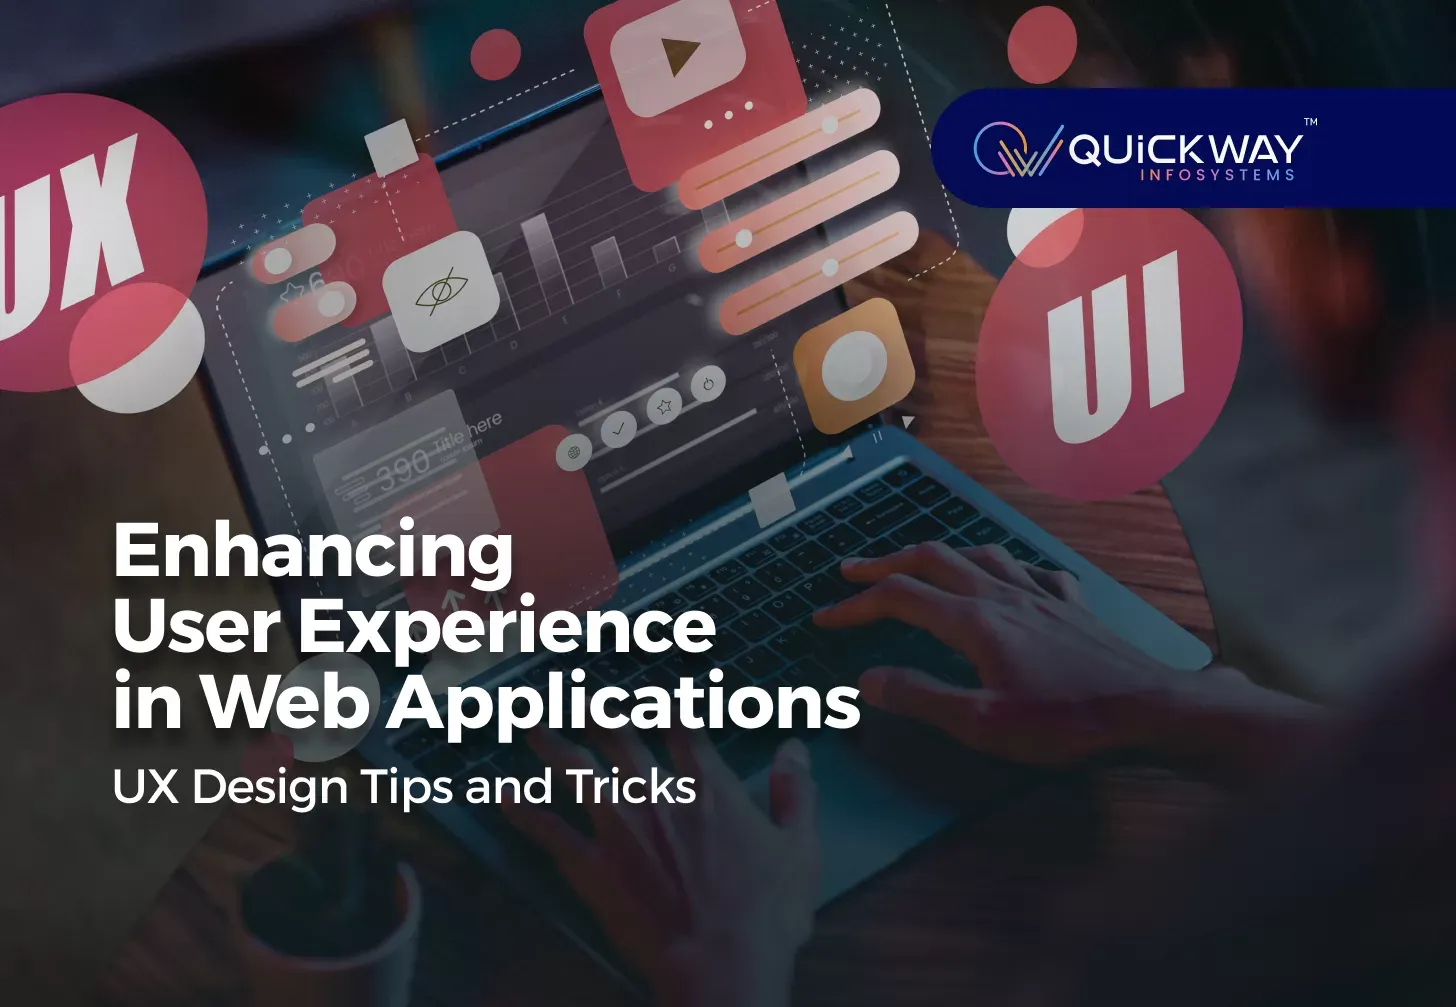 Enhancing User Experience in Web Applications: UX Design Tips and Tricks